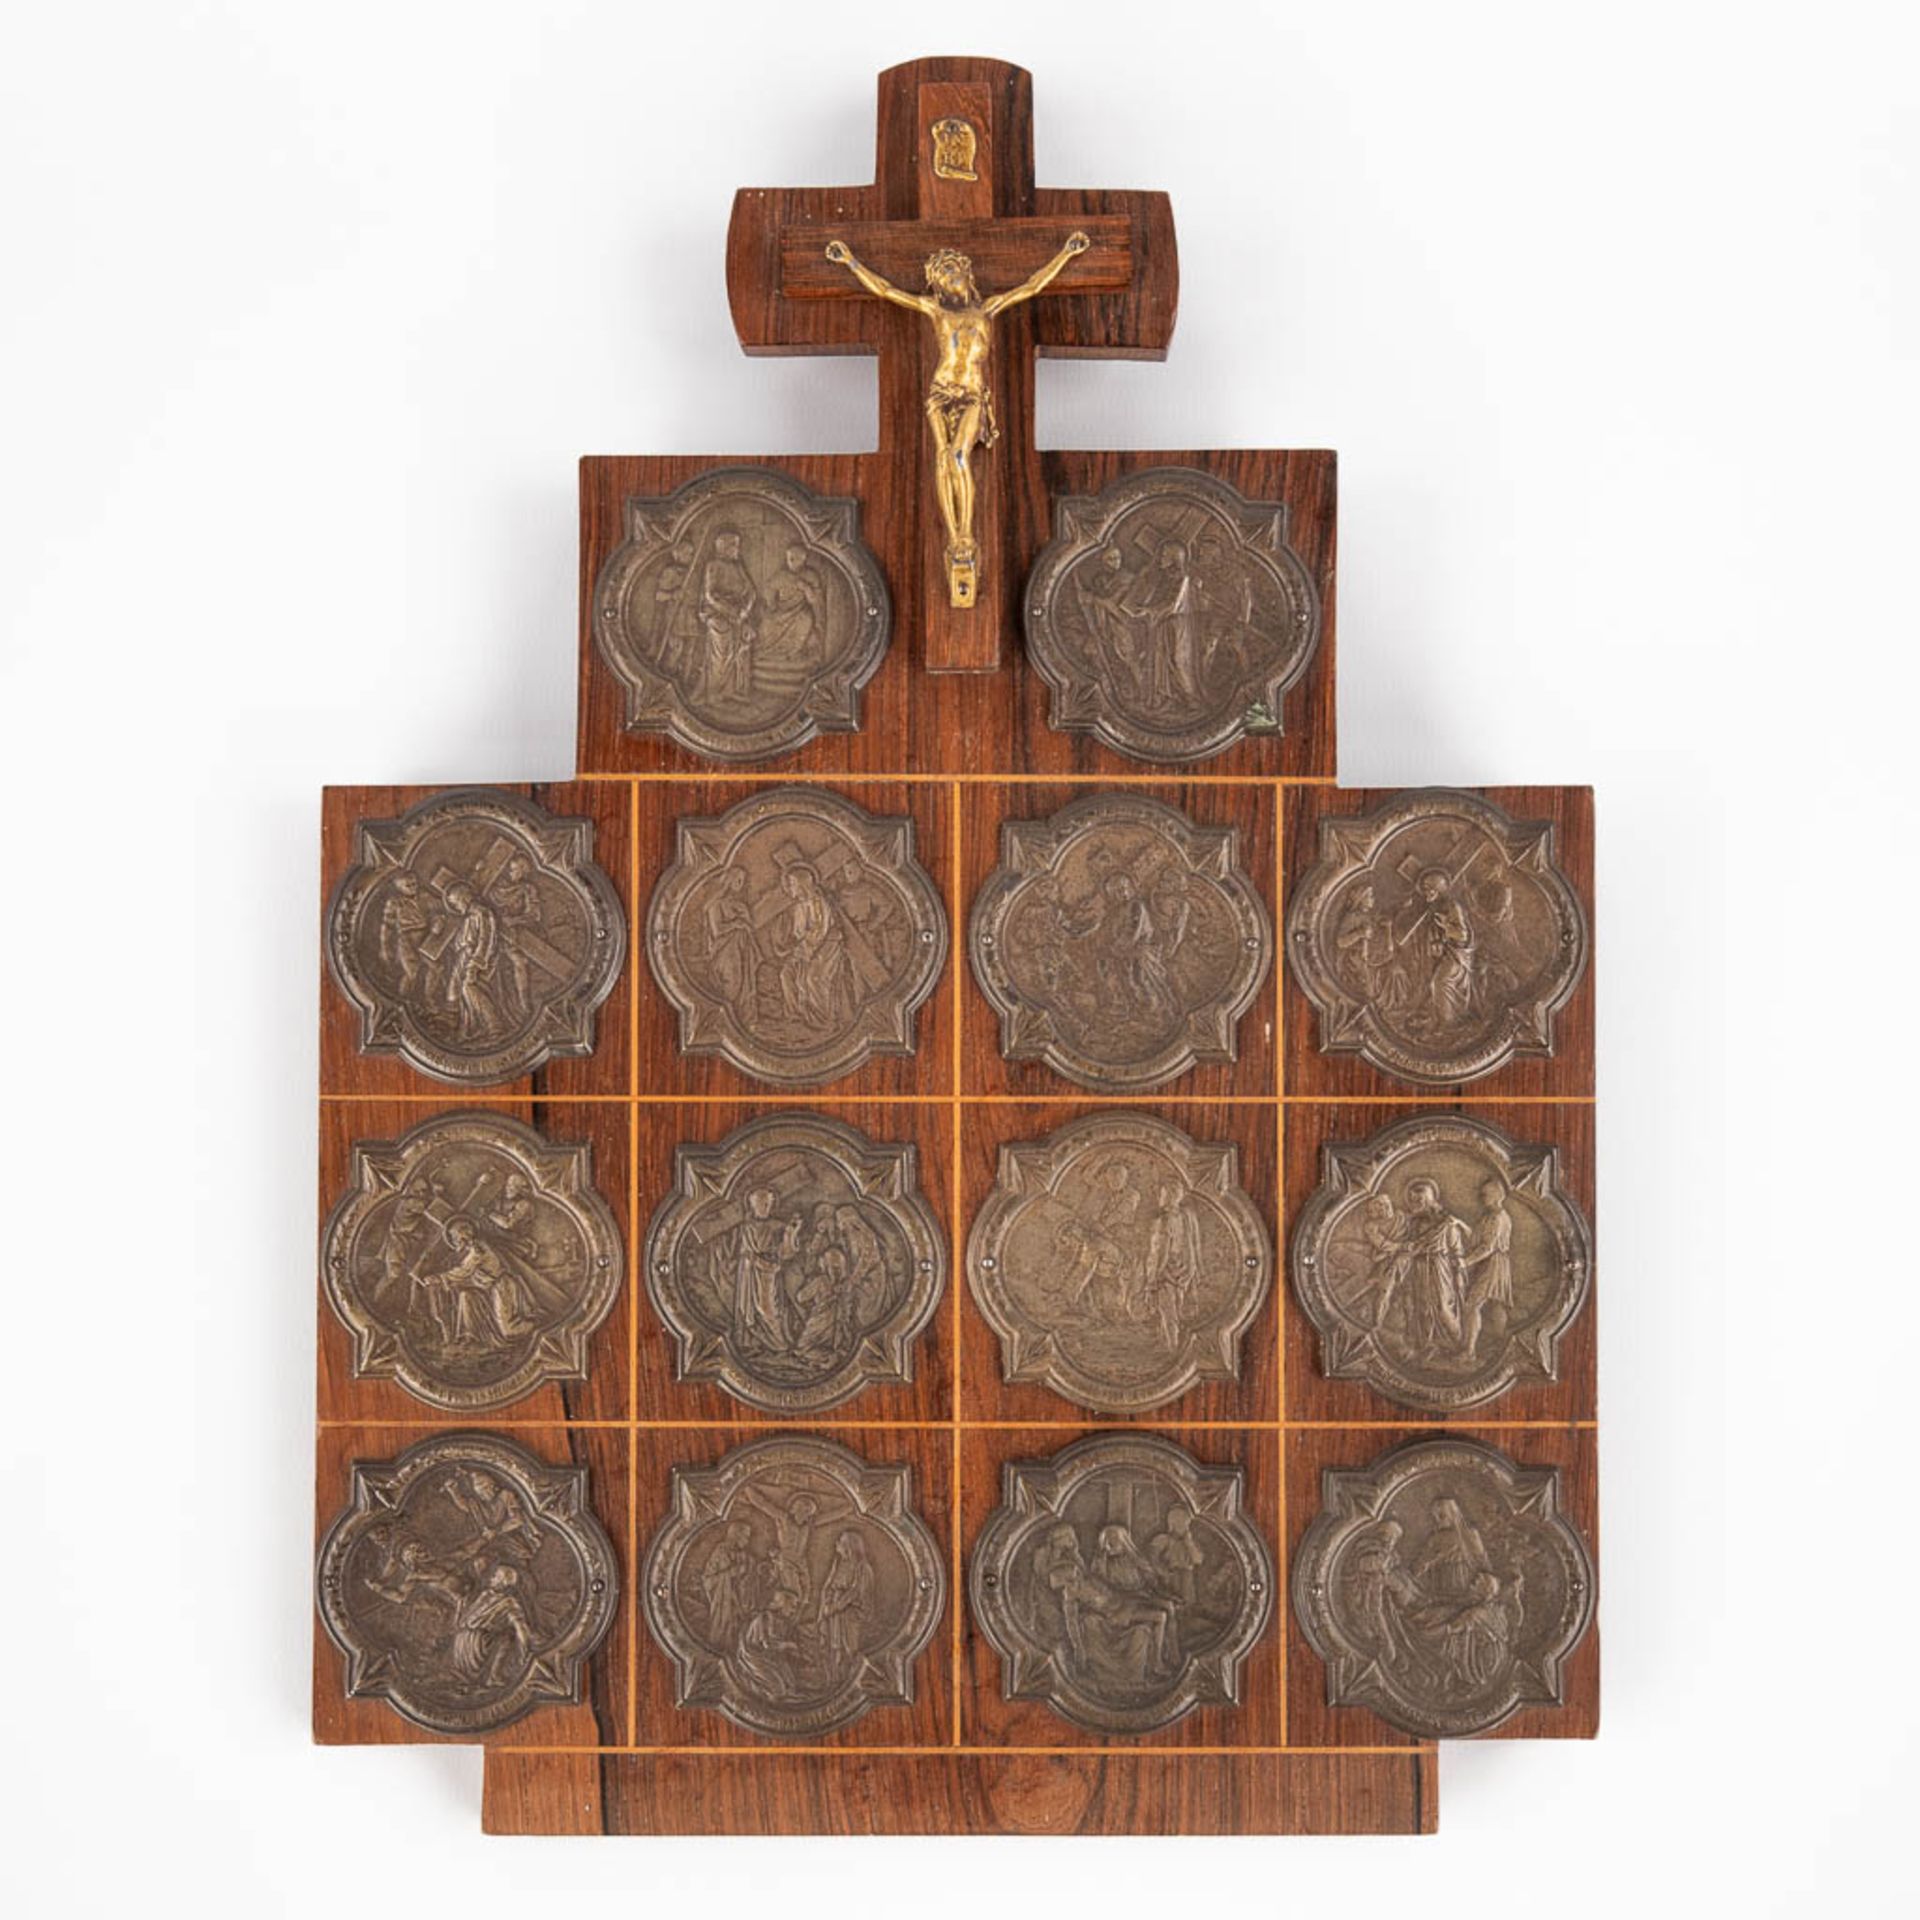 A wall plaque with 14 'Stations of the cross', medals and a crucifix. (W:22 x H:30 cm)